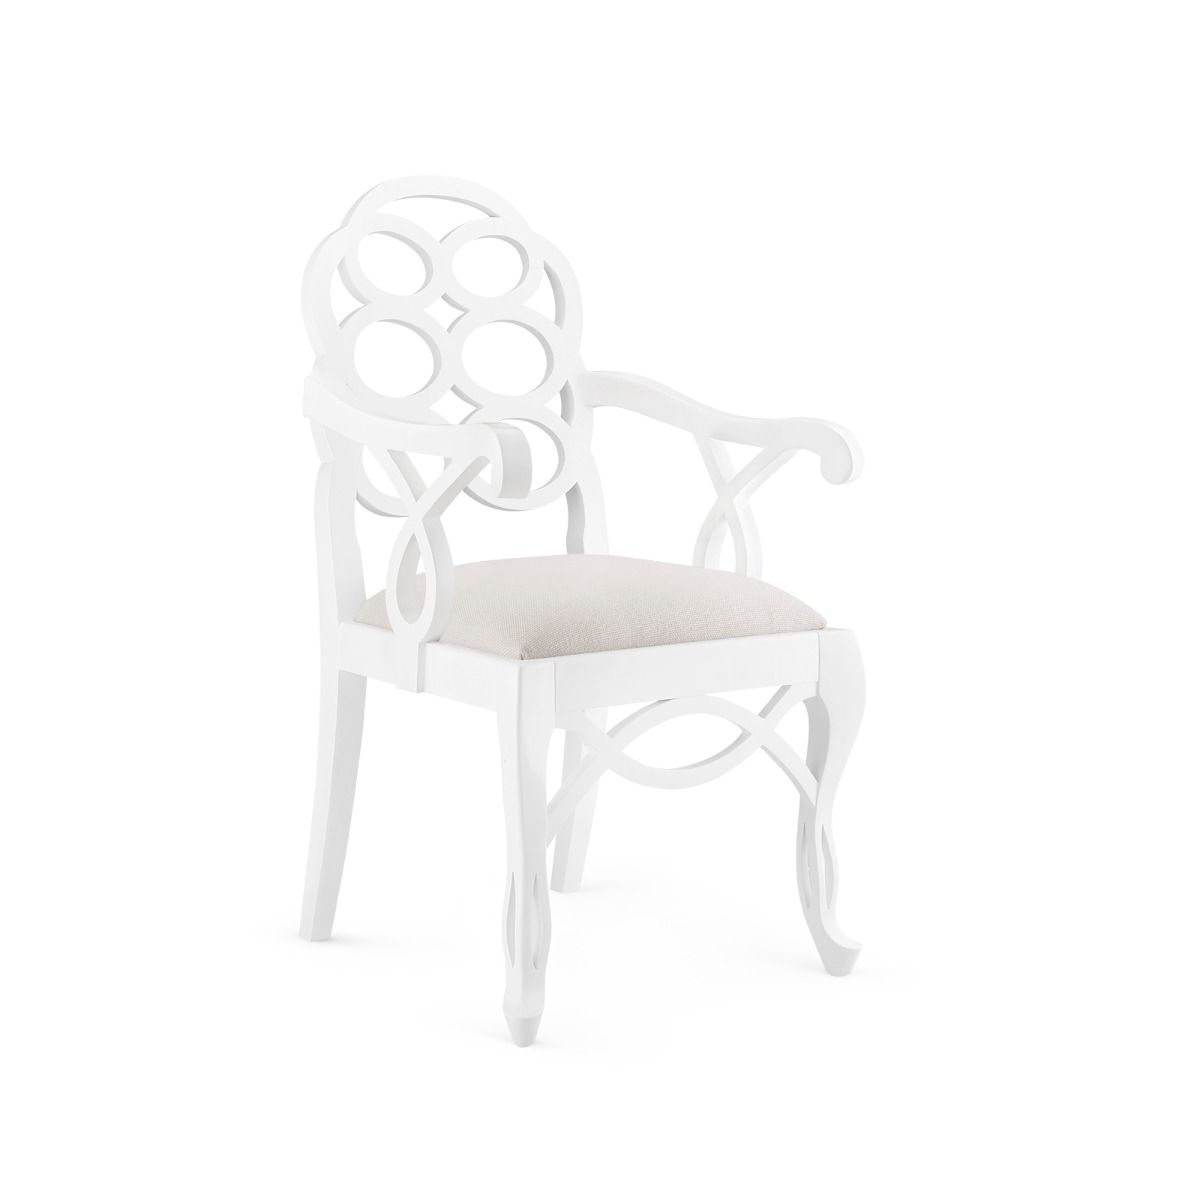 Load image into Gallery viewer, Loop Armchair, White Dining Chair Bungalow 5     Four Hands, Burke Decor, Mid Century Modern Furniture, Old Bones Furniture Company, Old Bones Co, Modern Mid Century, Designer Furniture, https://www.oldbonesco.com/
